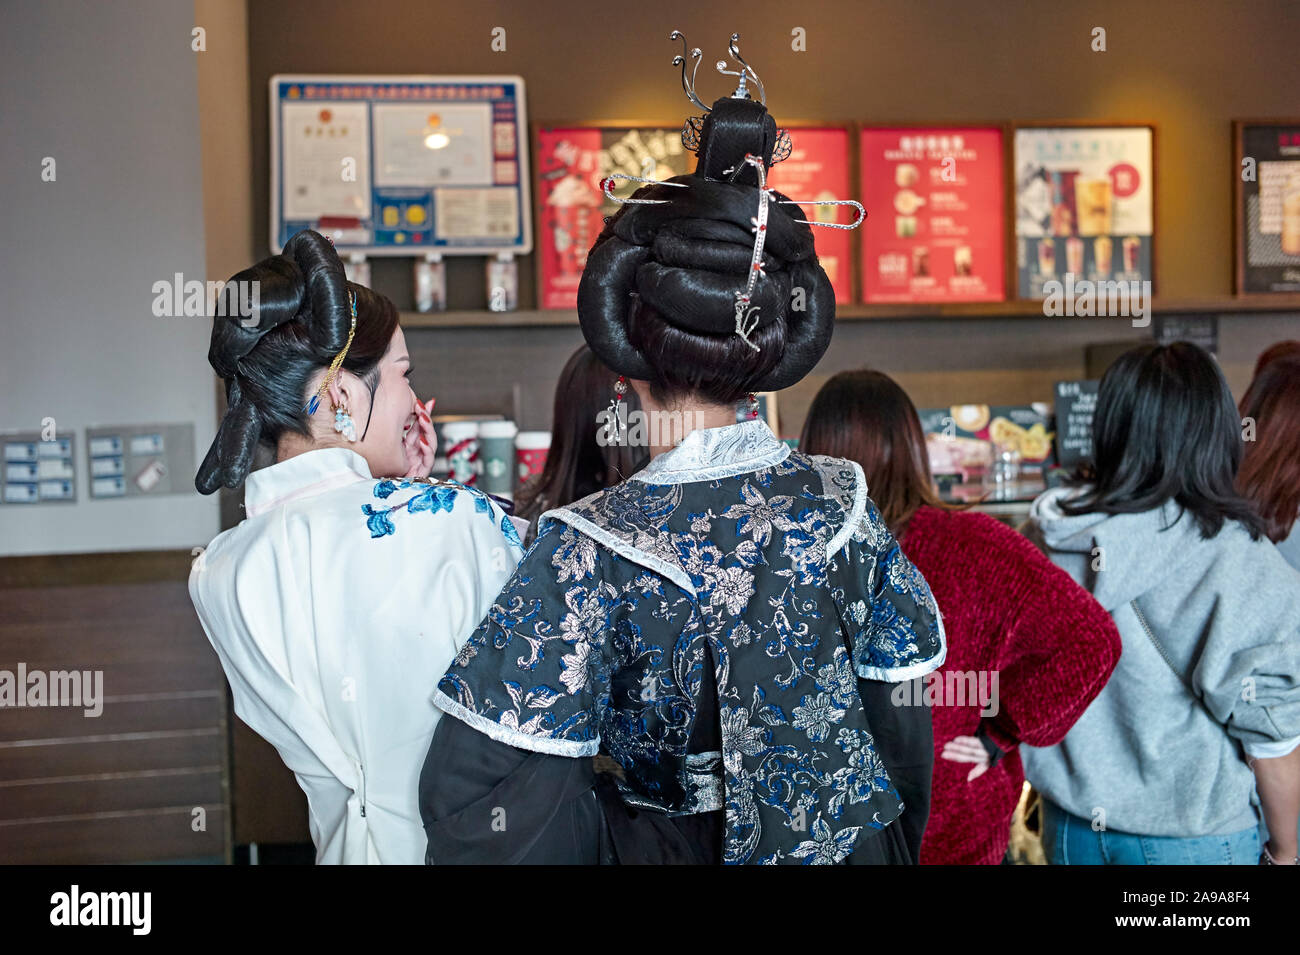 Traditional Chinese dressed female waiting in line at Starbucks coffee in Lishui, Zhejiang Province China, Stock Photo